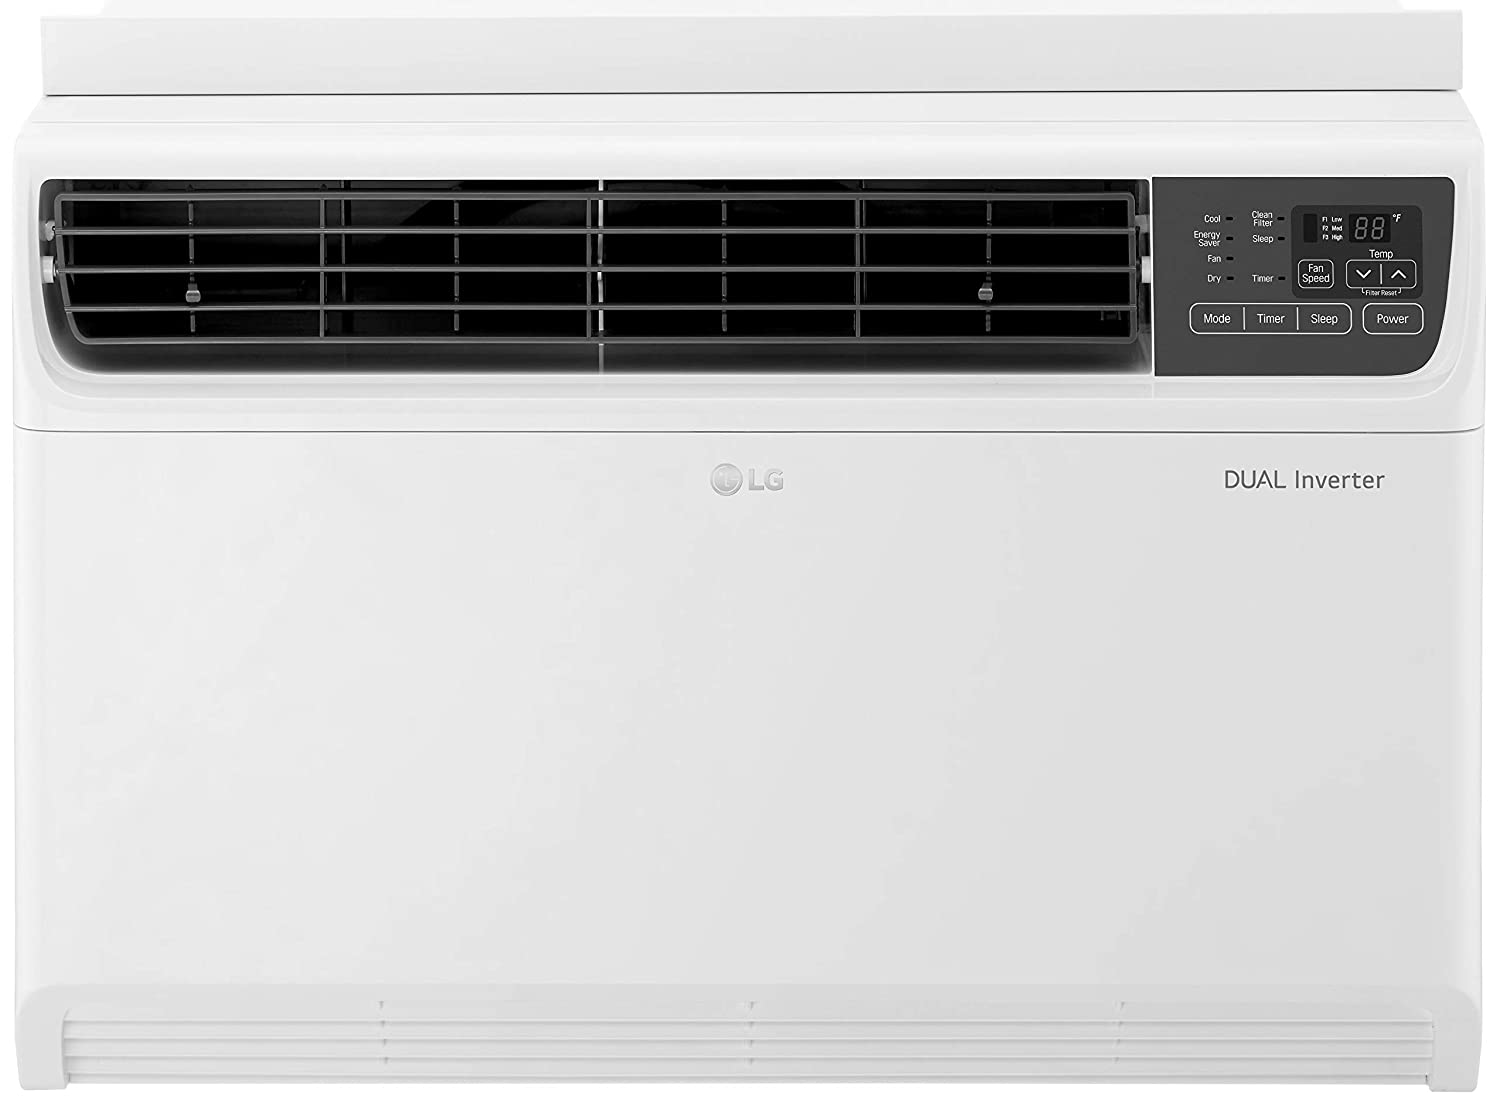 LG 1.5 Ton 4 Star DUAL Inverter Window AC (Copper, Convertible 4-in-1 cooling, PW-Q18WUXA, 2022 Model, HD Filter, White)